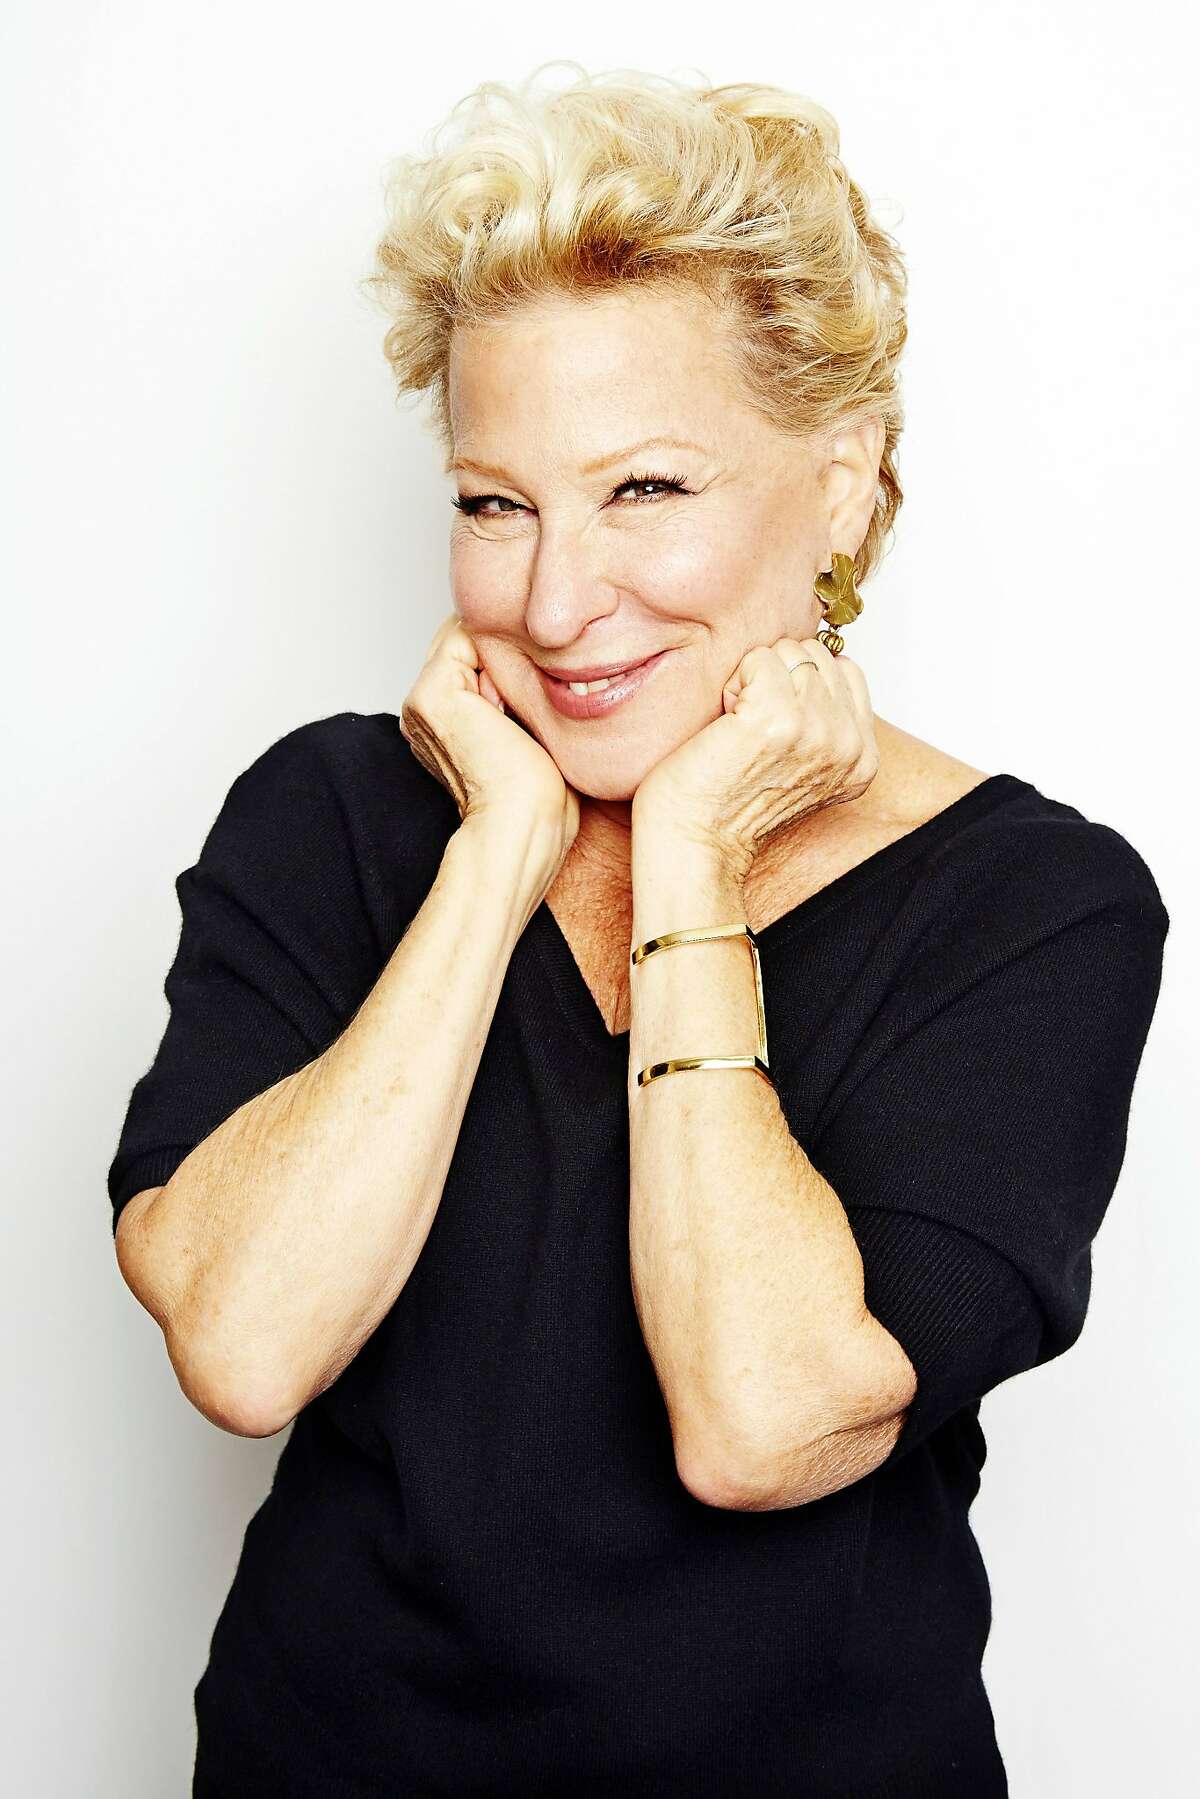 In this Oct. 7, 2014 photo, entertainer Bette Midler poses for a portrait in promotion of her upcoming album "It's the Girls!" in New York. The album is an eclectic collection of covers of 15 famous songs by seven decades of girl groups, from The Andrews Sisters to TLC. It's also Midler's 25th album and first studio offering in eight years. (Photo by Dan Hallman/Invision/AP)